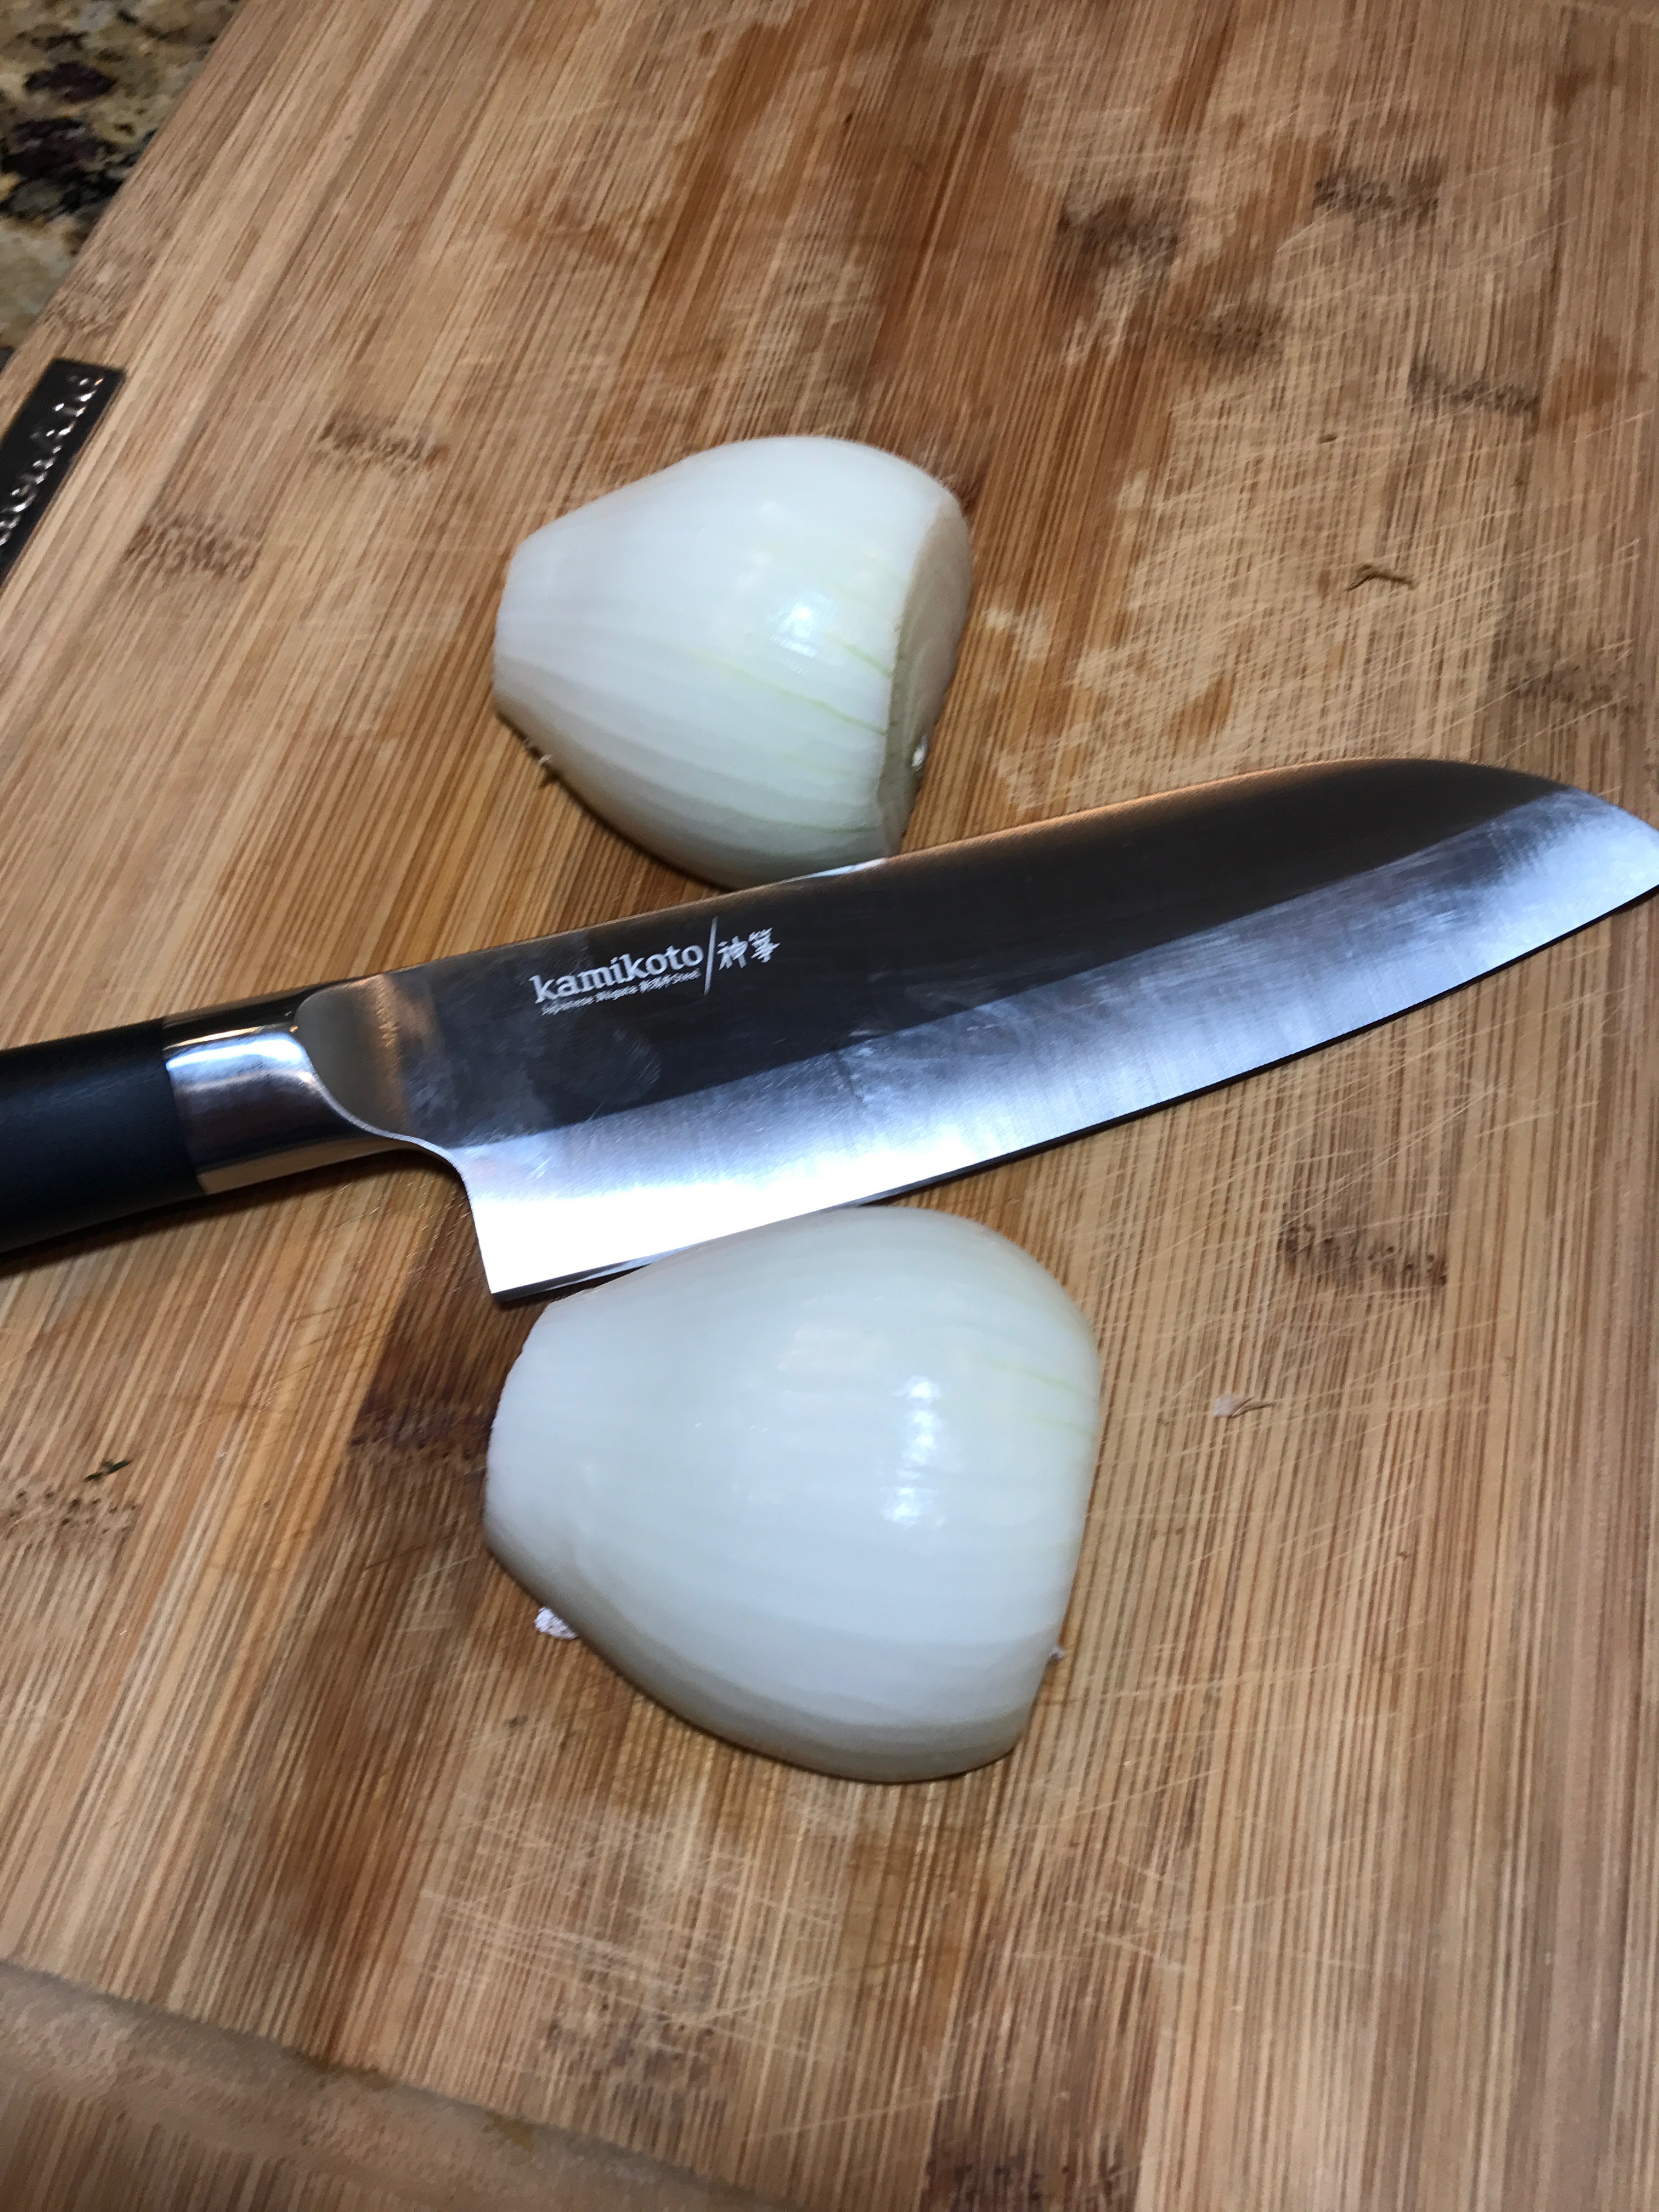 Kamikoto Knives Review: Is Kamikoto Knife Worth The Price?